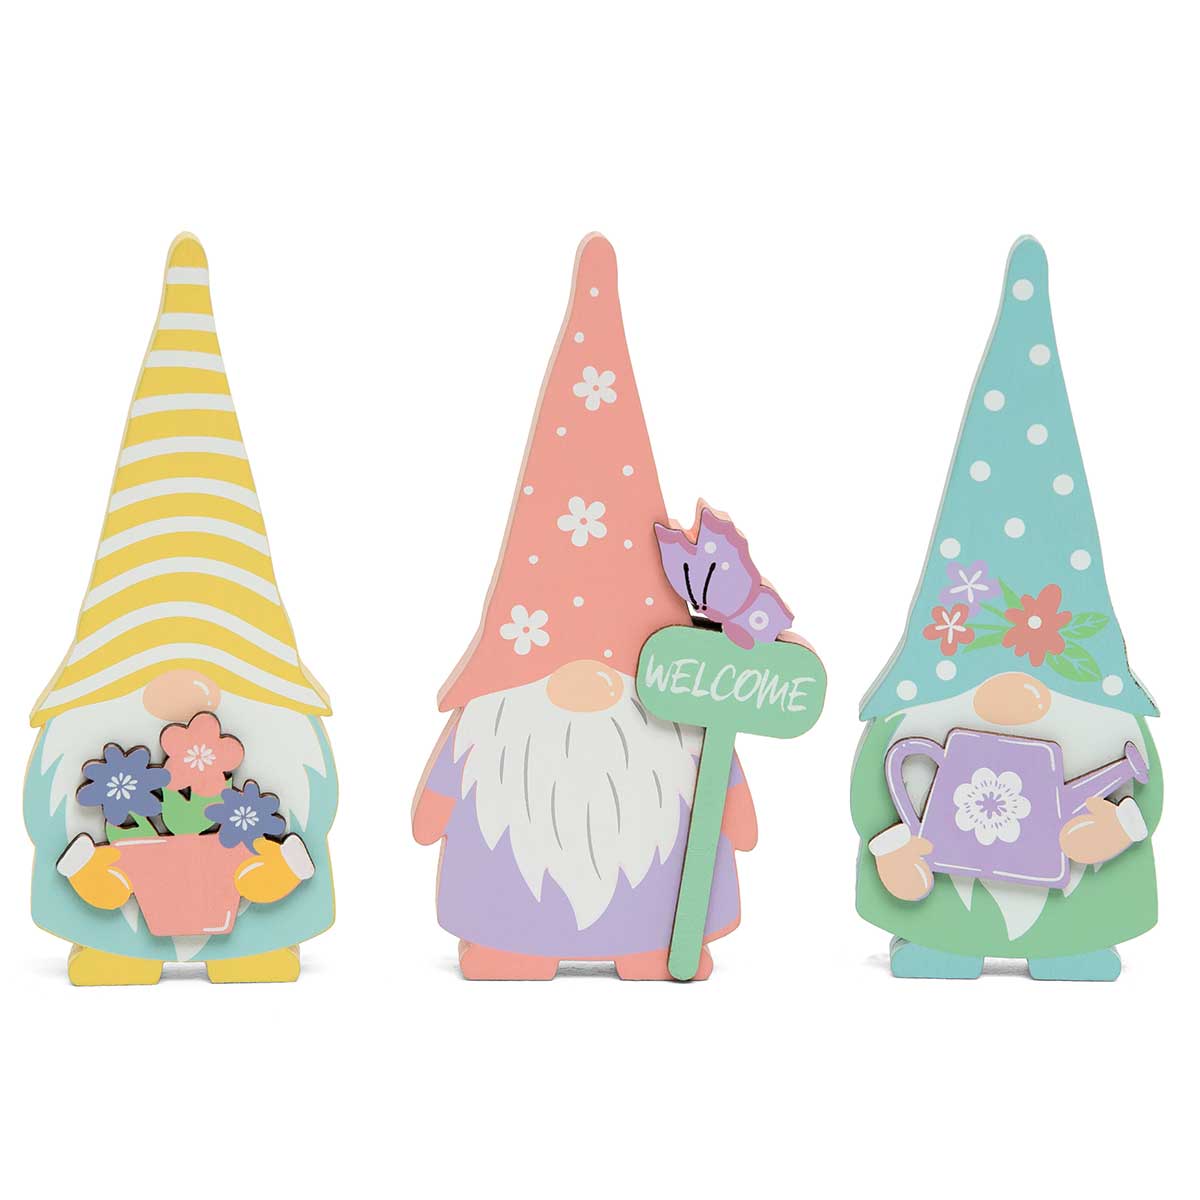 SUMMER WOOD GNOME SIT-A-BOUT BLUE/GREEN/PINK 3 ASSORTED